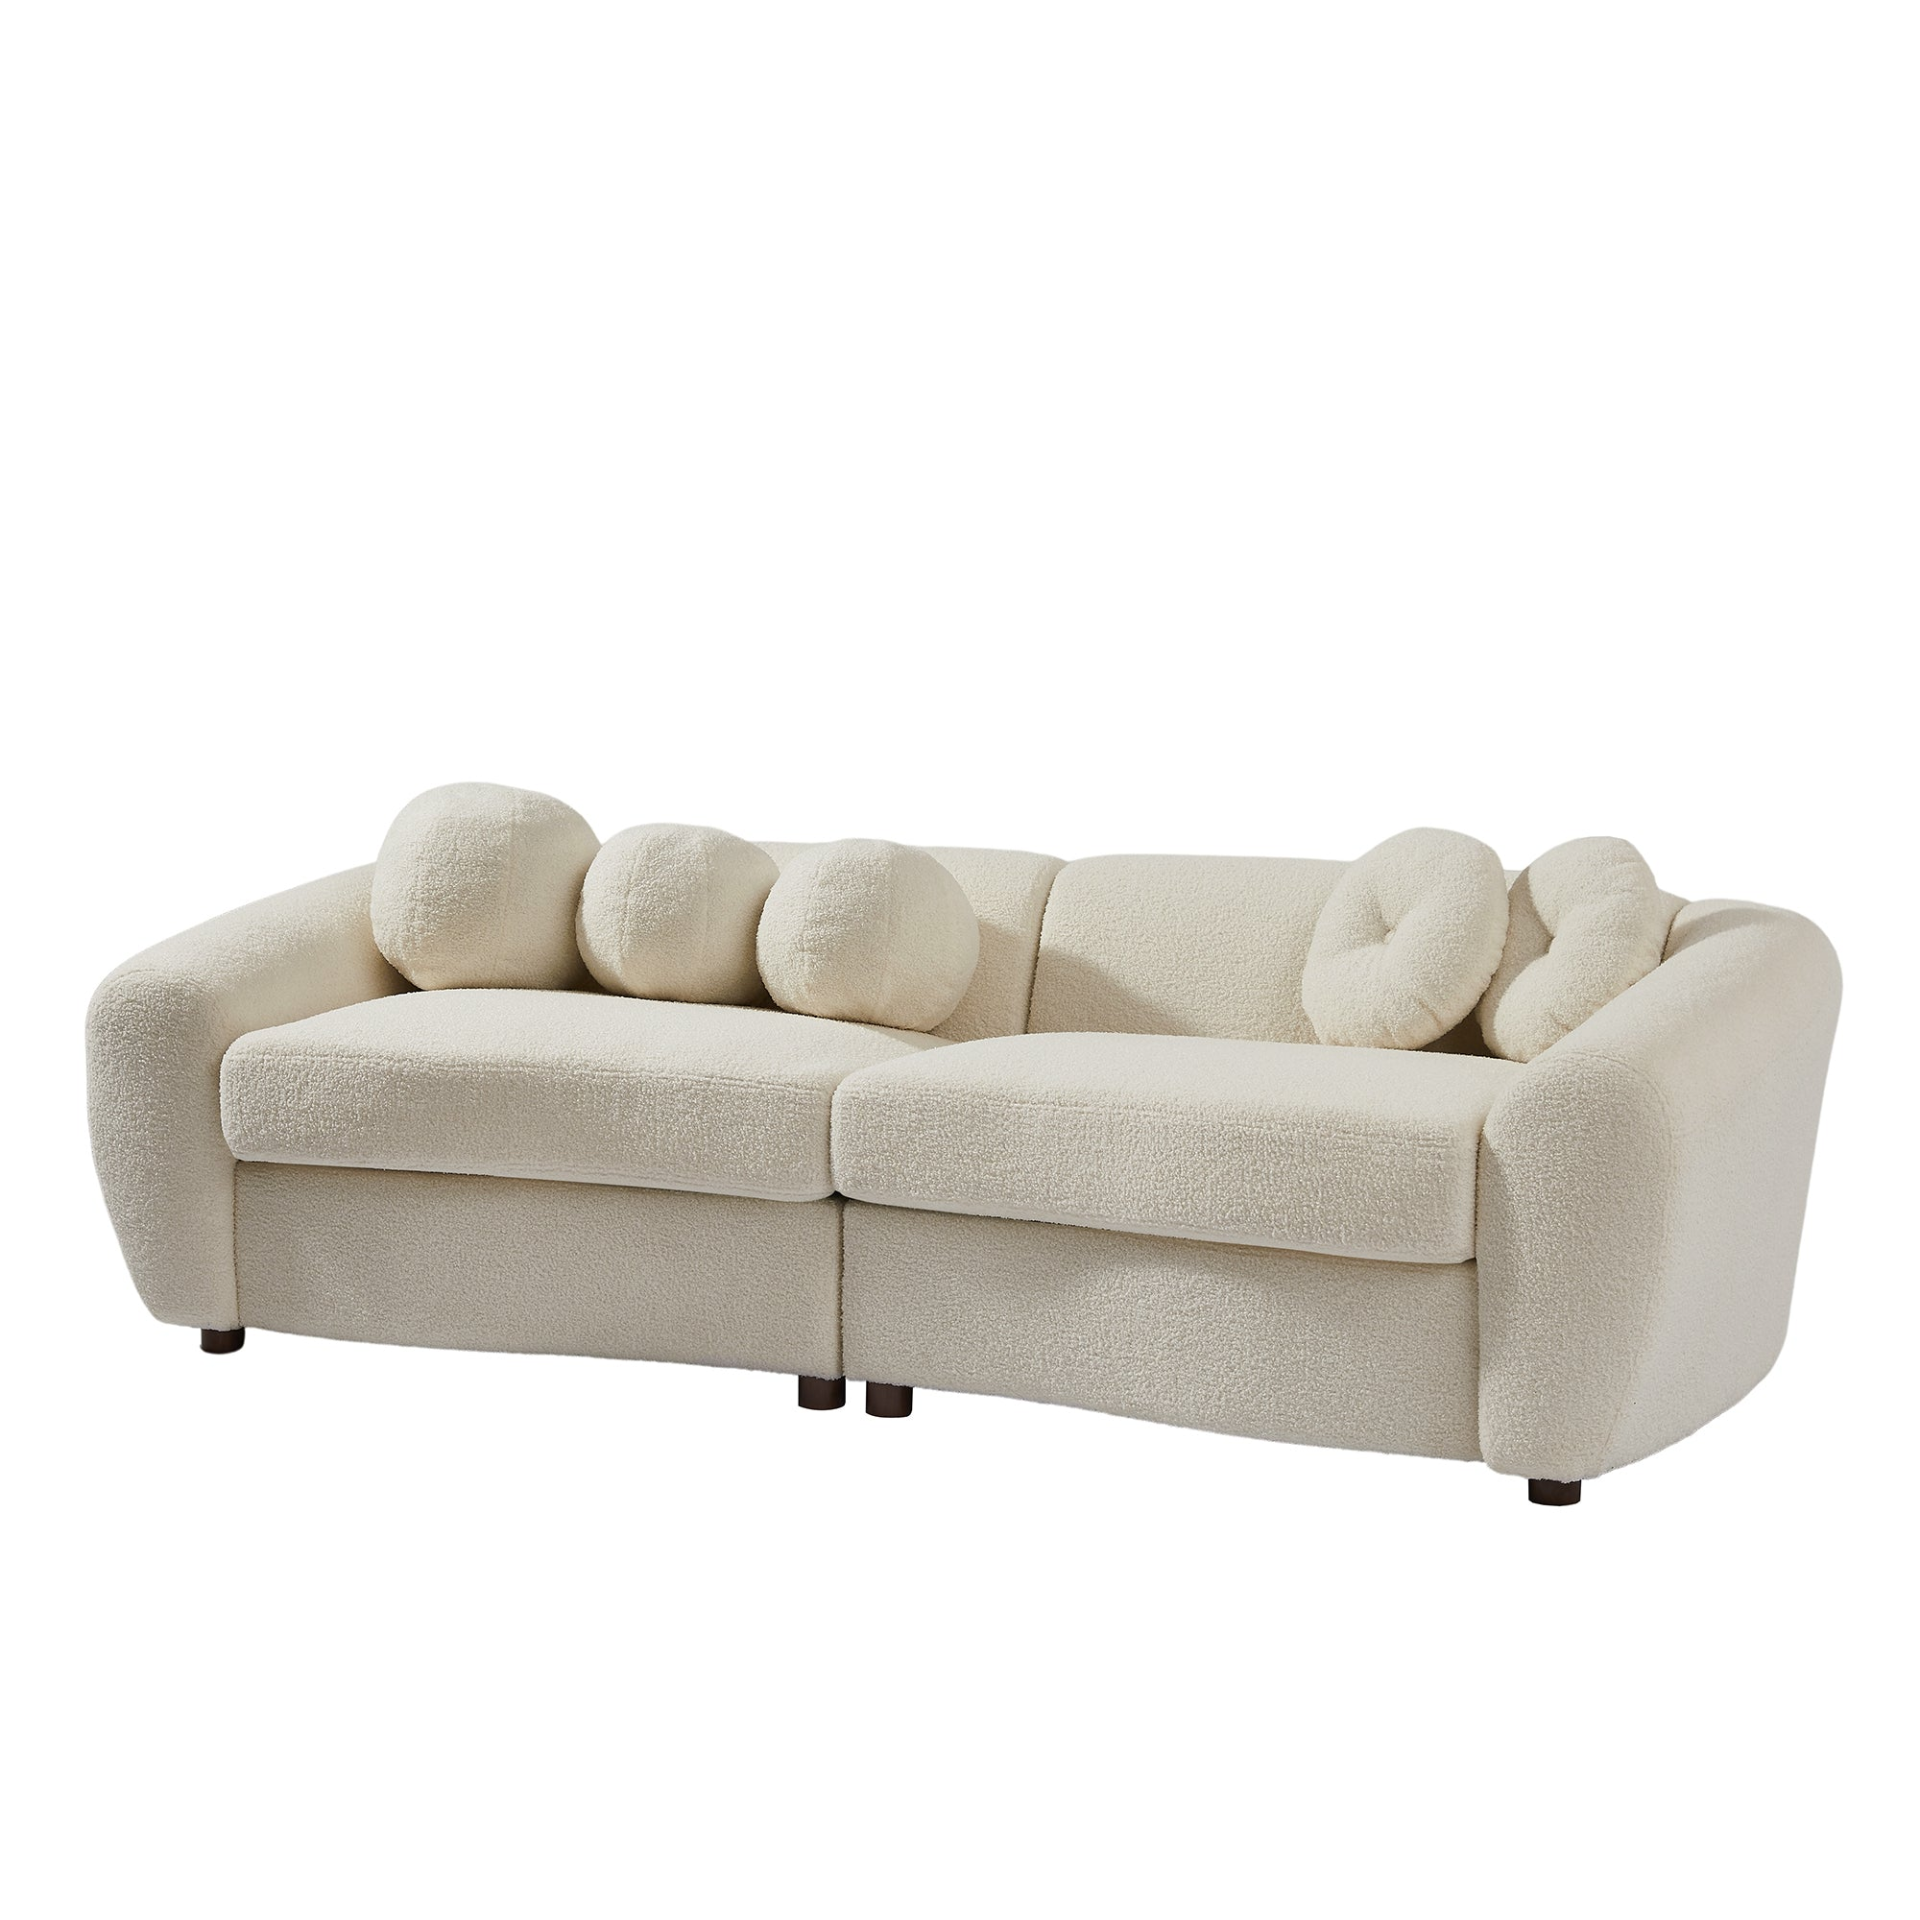 Beige - Stylish Contemporary Curve Style Sofa With (5) Throw Pillows - (87.7")